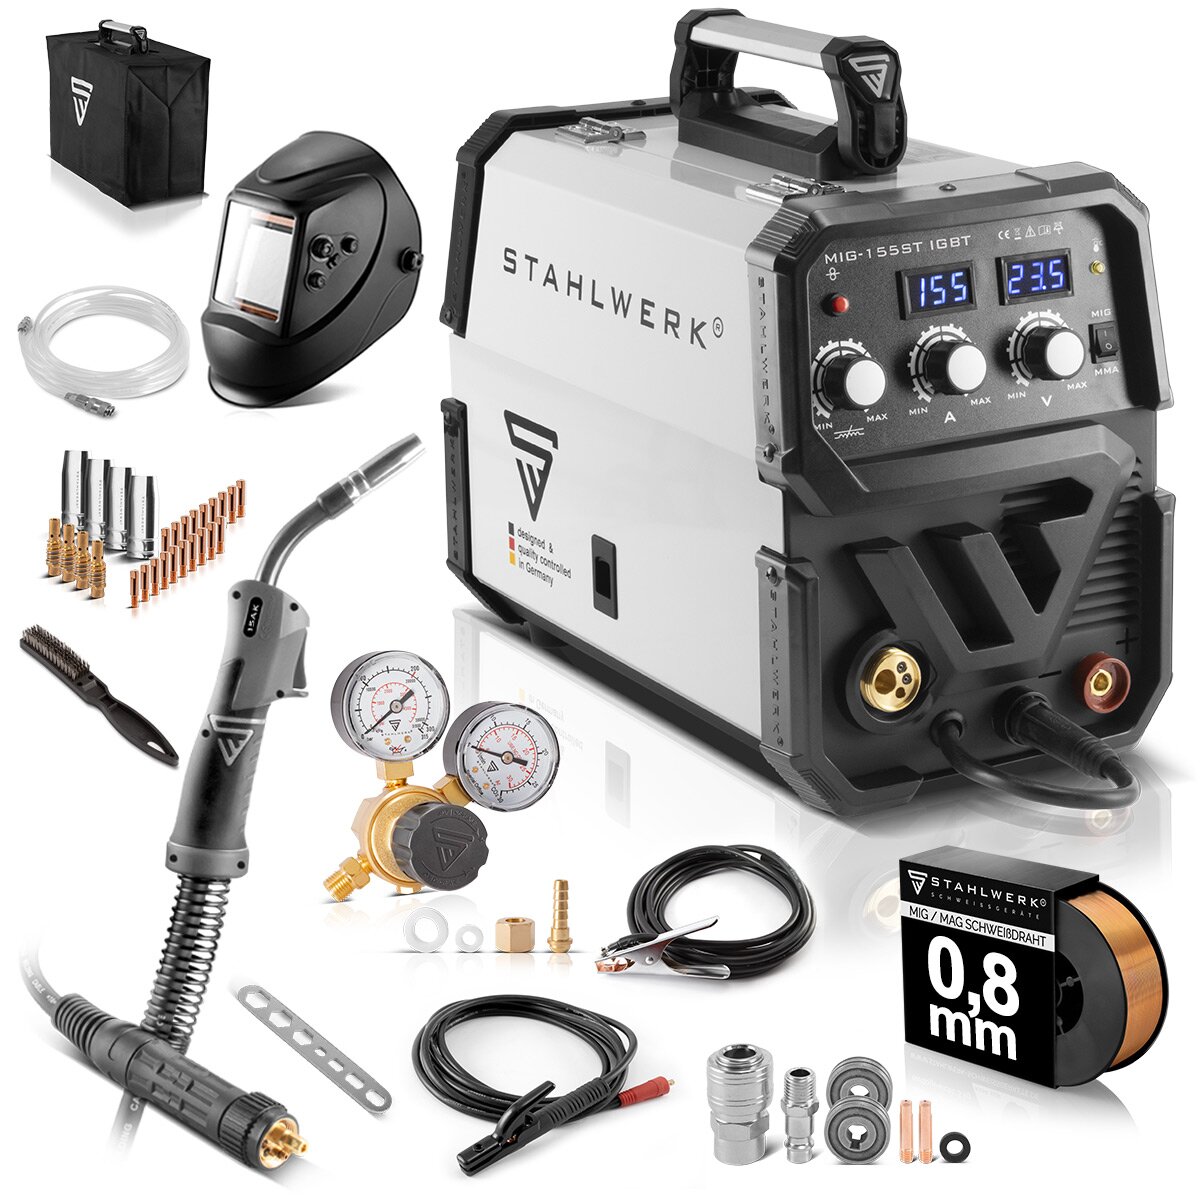 STAHLWERK MIG 155 ST IGBT 5 years warranty* with MMA ARC Stick MIG MAG inert gas inverter welder with 155 Ampere white suitable for Flux Cored Wire